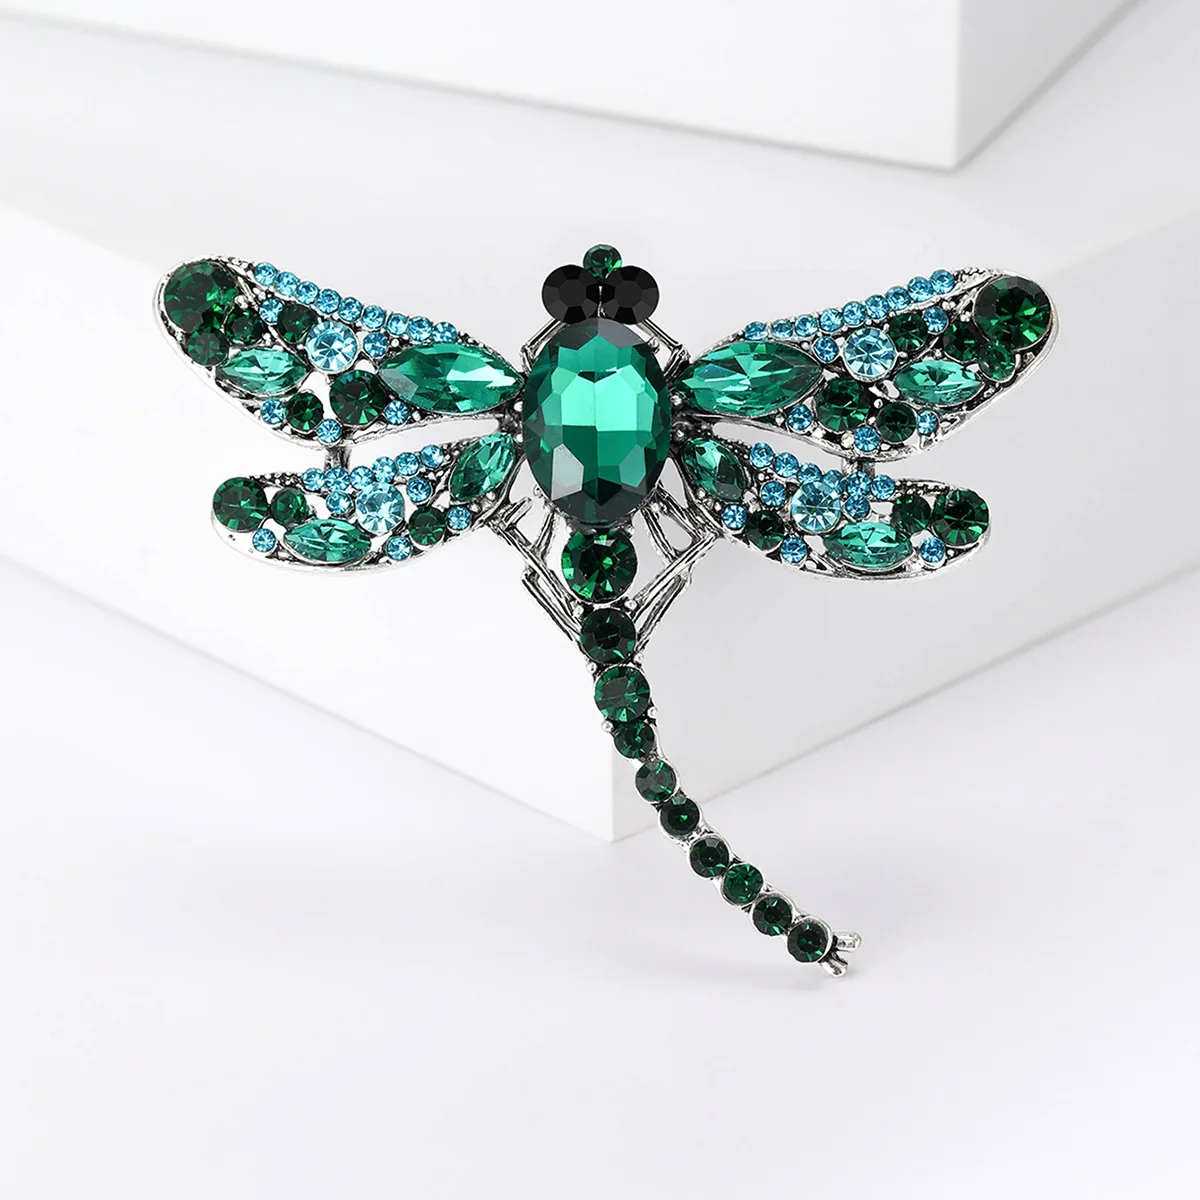 

Fashion Smaller Rhinestone Wings Dragonfly Brooch For Women Man Suit Exquisite Crystal Dragonfly Animal Brooches Jeweley Gifts